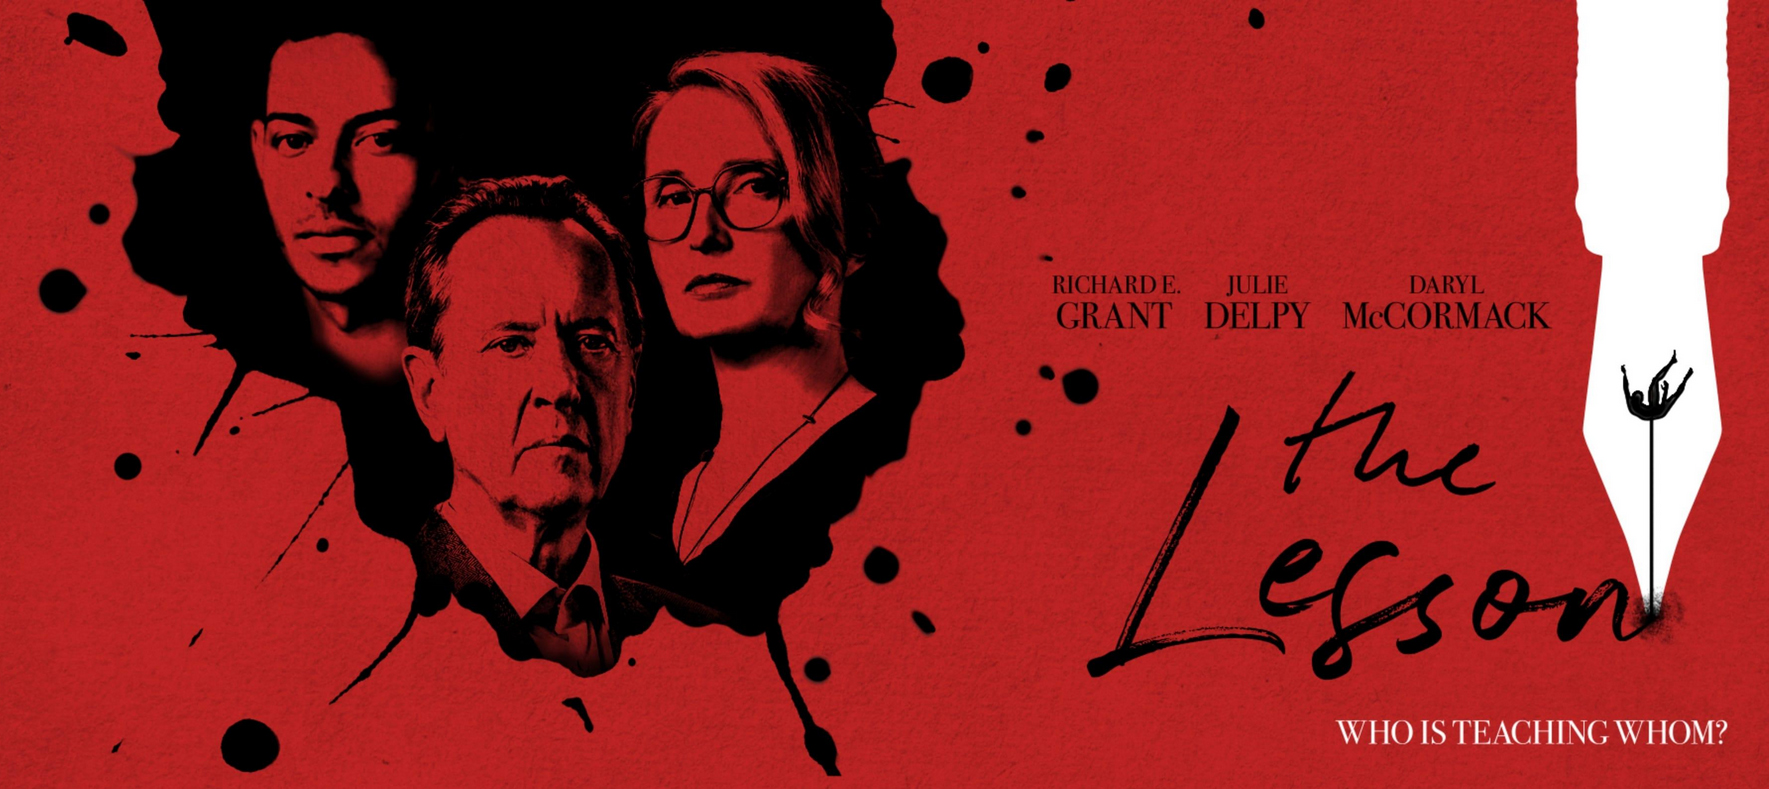 In black before a blood-red background, the faces of the main characters and the title of "The Lesson"